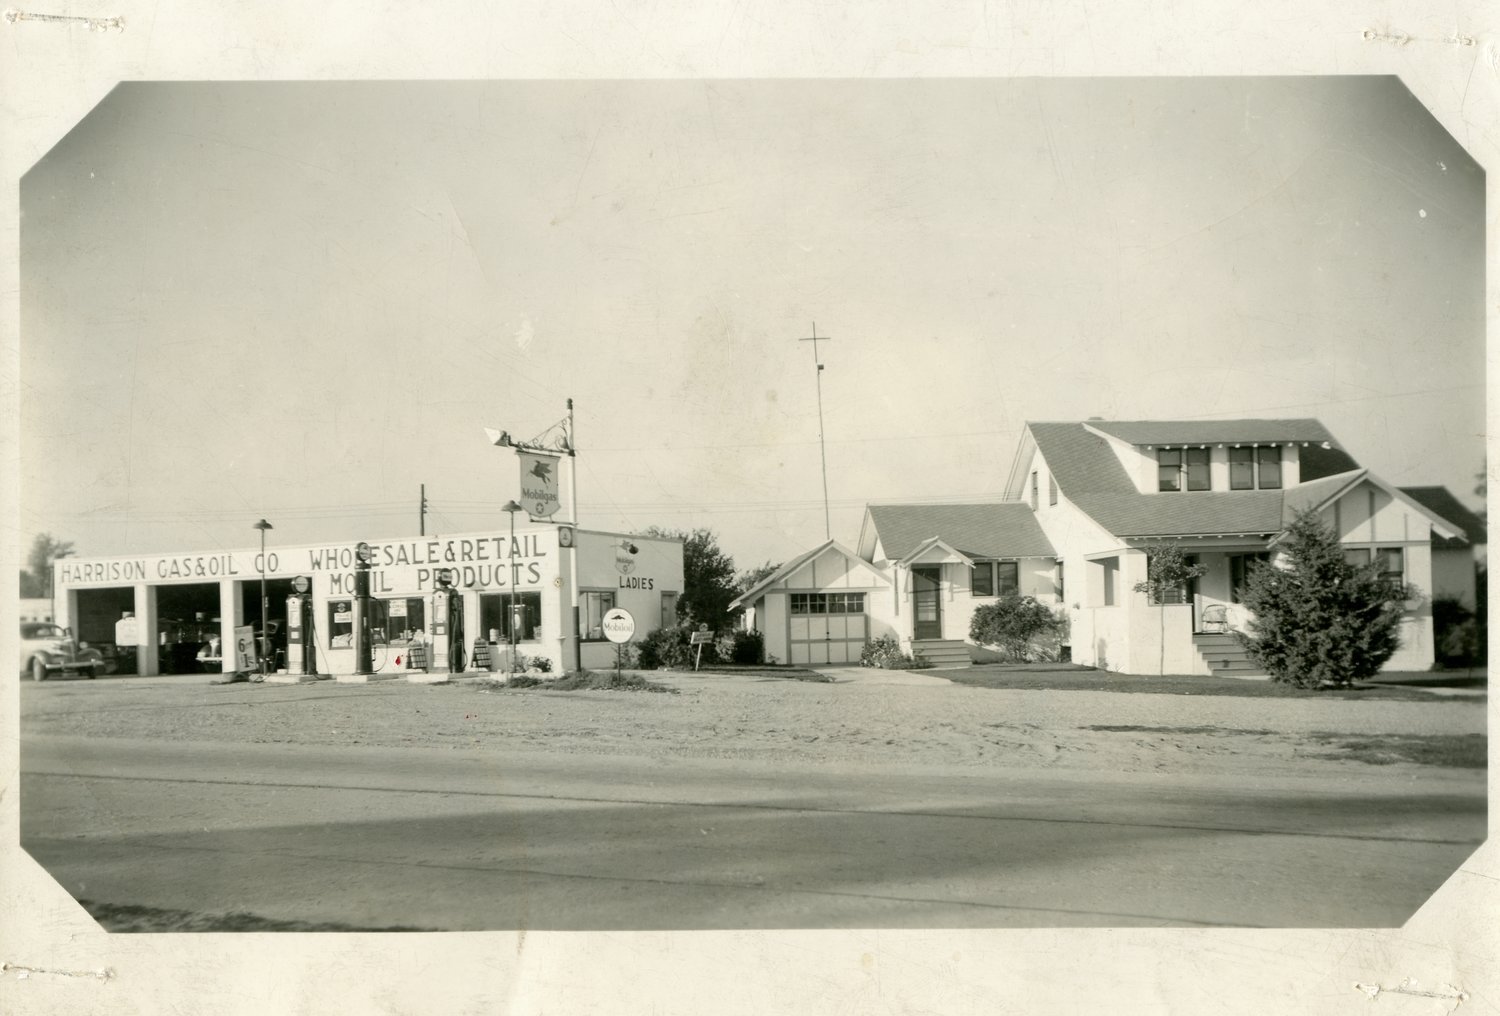 Harrison Gas and Oil in the 1930s